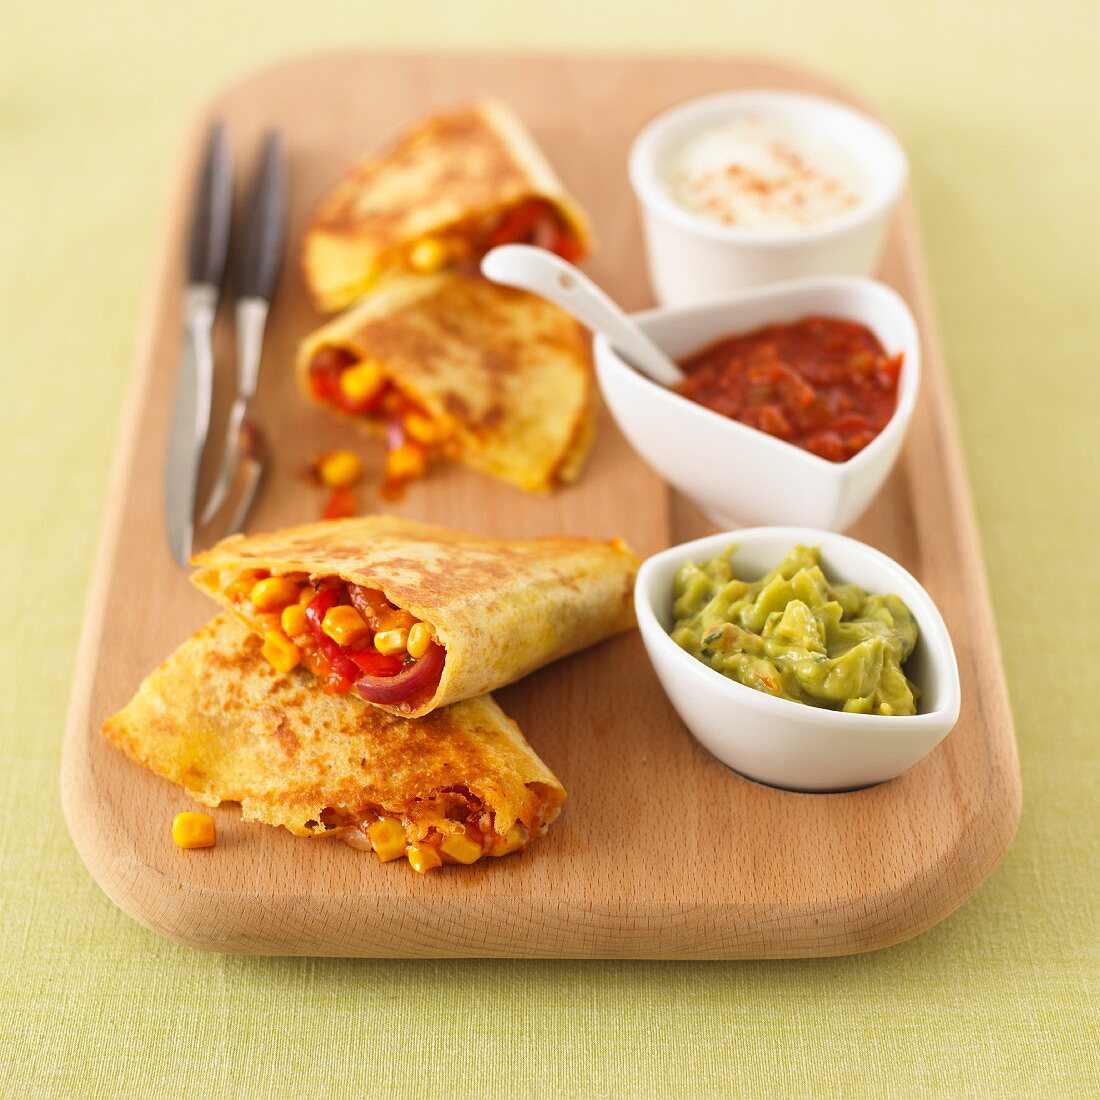 Quesadillas with sweetcorn filling and assorted dips